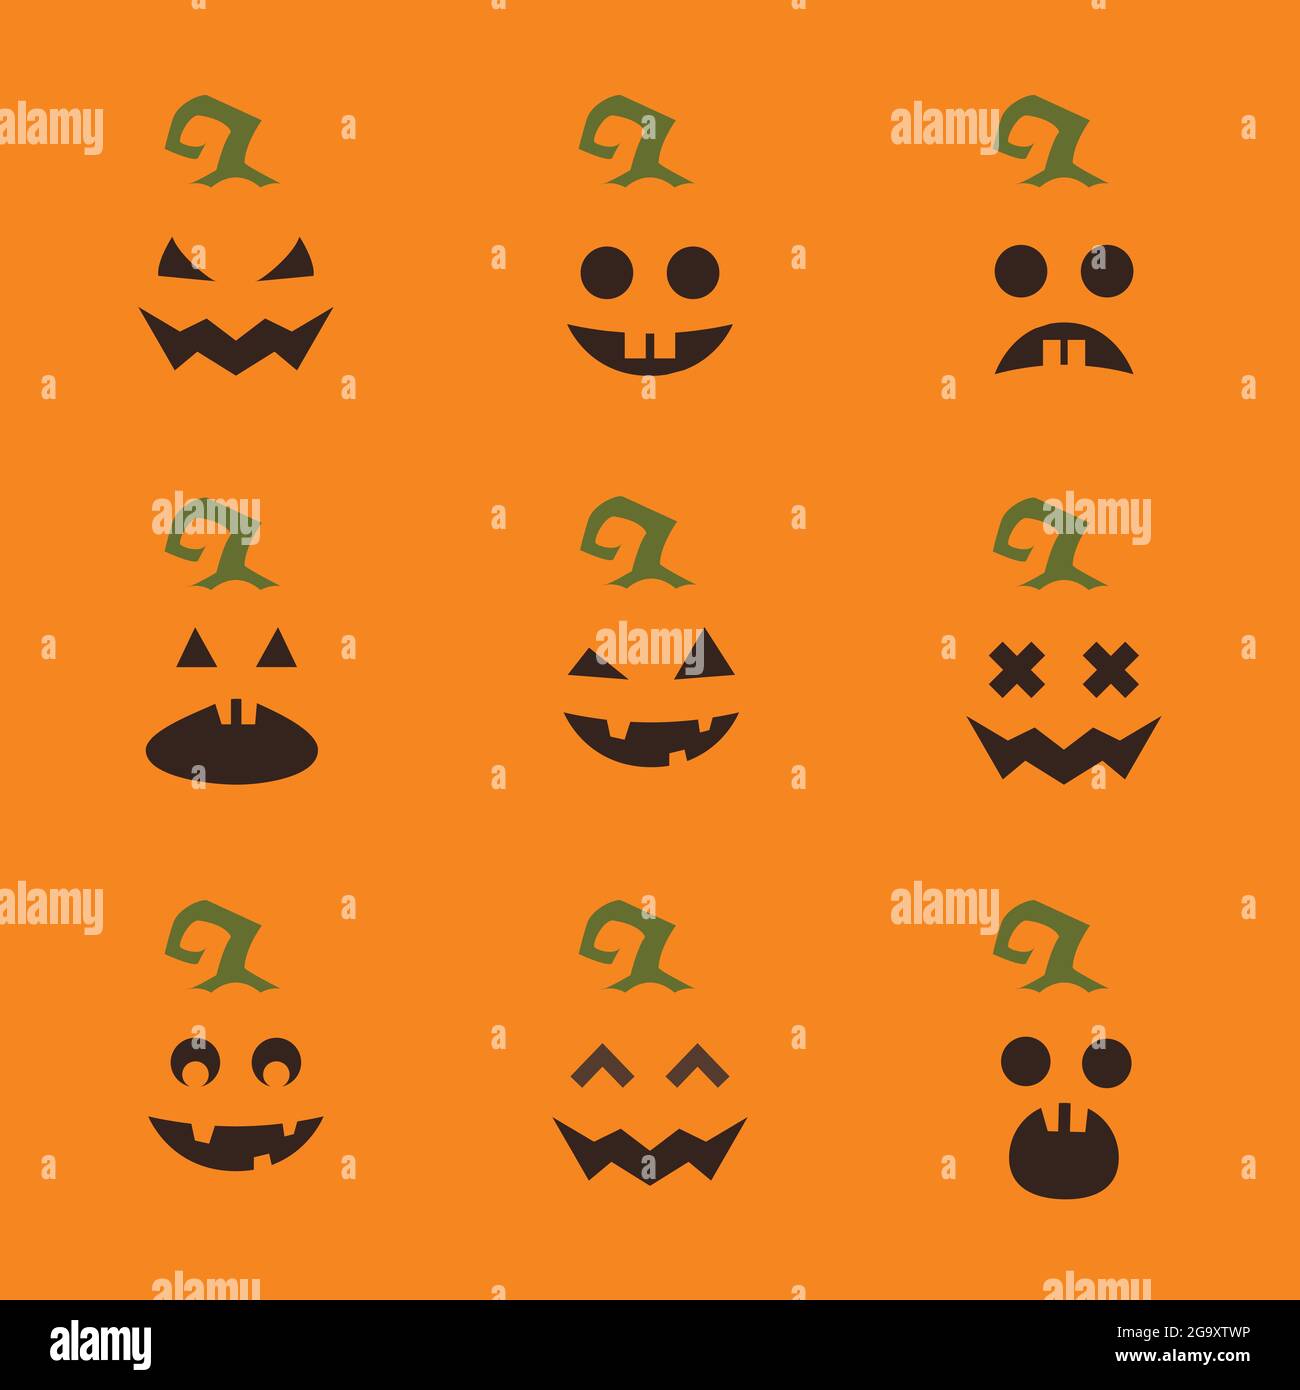 Pumpkin Faces High Resolution Stock Photography and Images - Alamy